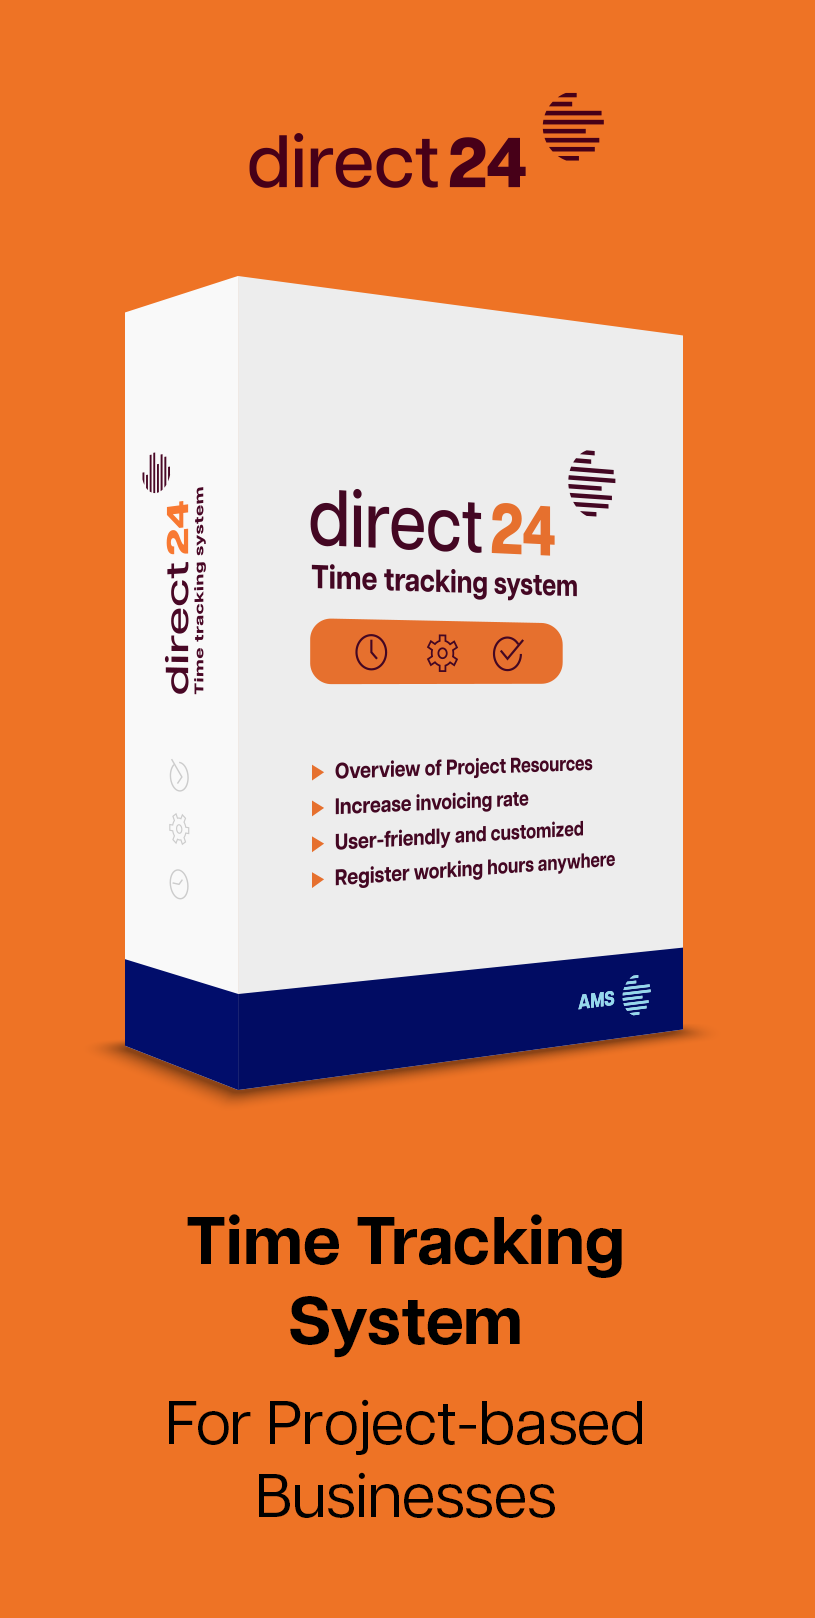 Our developed software family, direct, is launched in a new profile with a clear description of each product's functionality. direct MES, direct 24, direct FMS, direct FOOD, Manufacturing Execution System, Flexible Manufacturing System